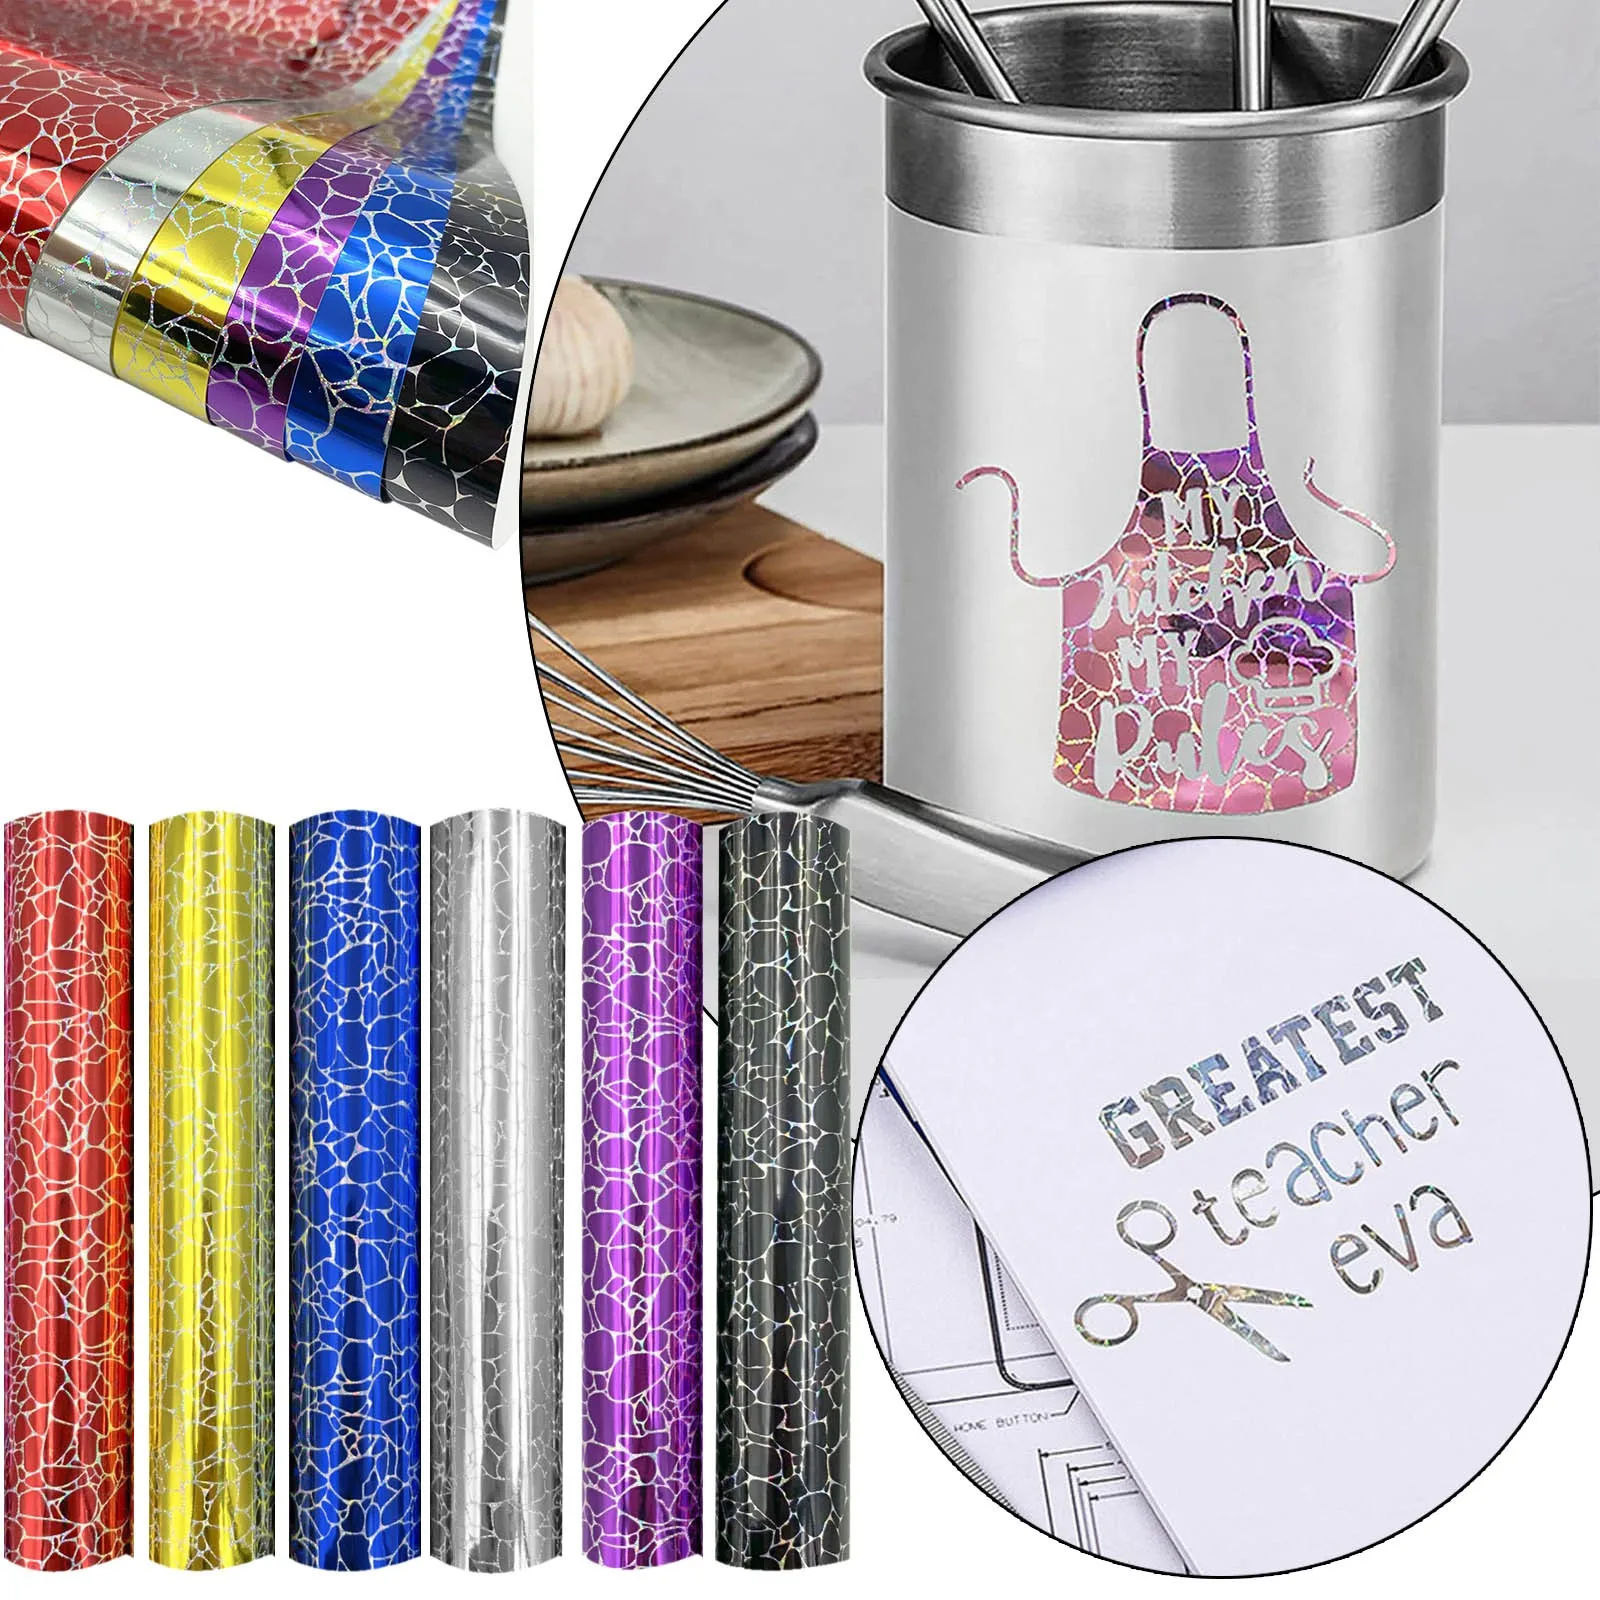 Multicolor Adhesive Craft Permanent Vinyl Roll Design Lettering Film Cup  Glass Decal Sticker Xmas Card DIY Self-adhesive Film - AliExpress